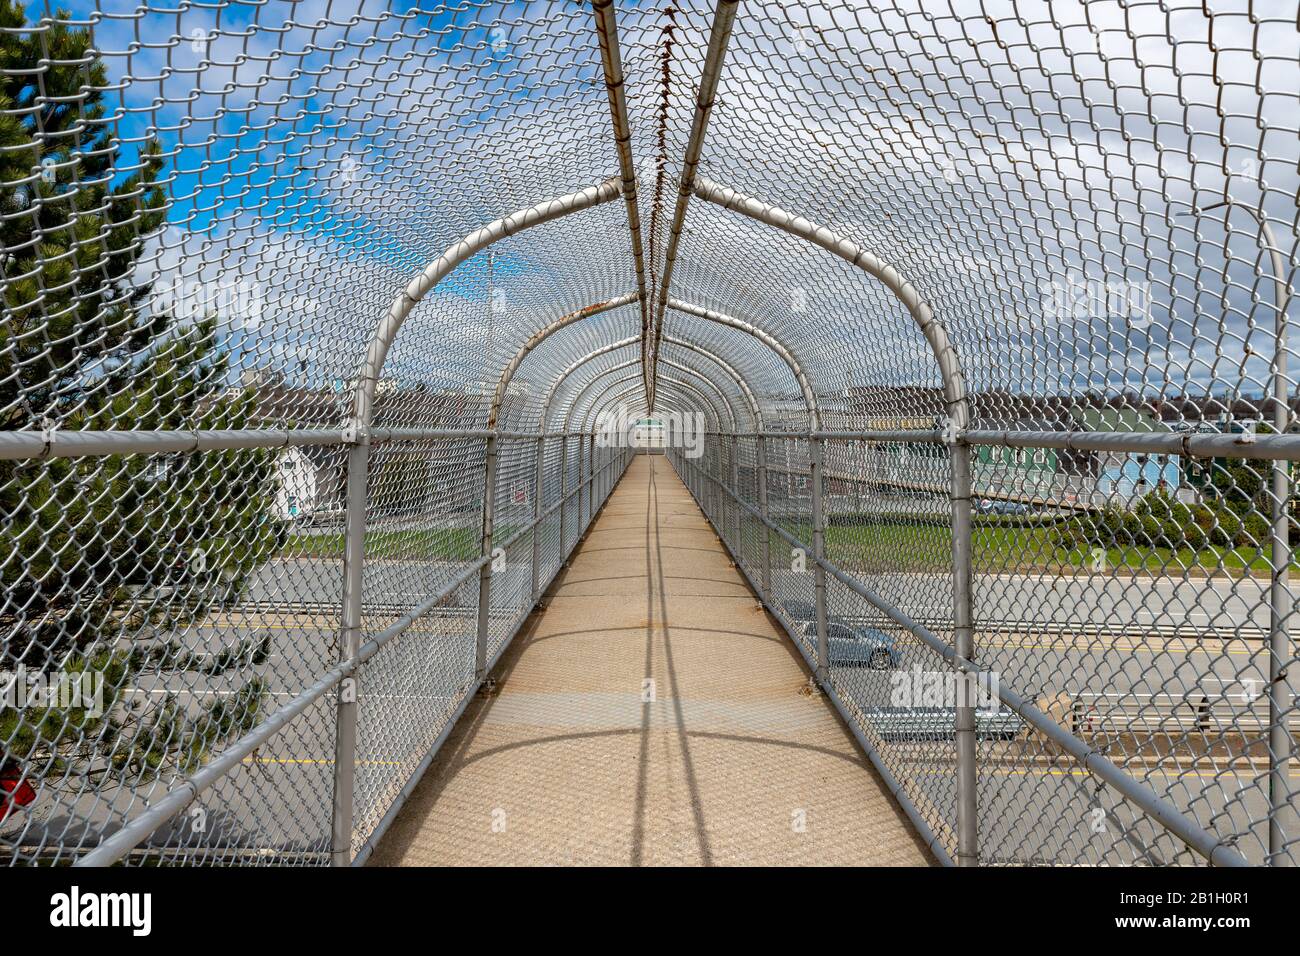 Inside a fenced in walkway over a highway. The walkway has a concrete floor and chain link fencing enclosing the sides and top.Blue and cloudy sky. Stock Photo